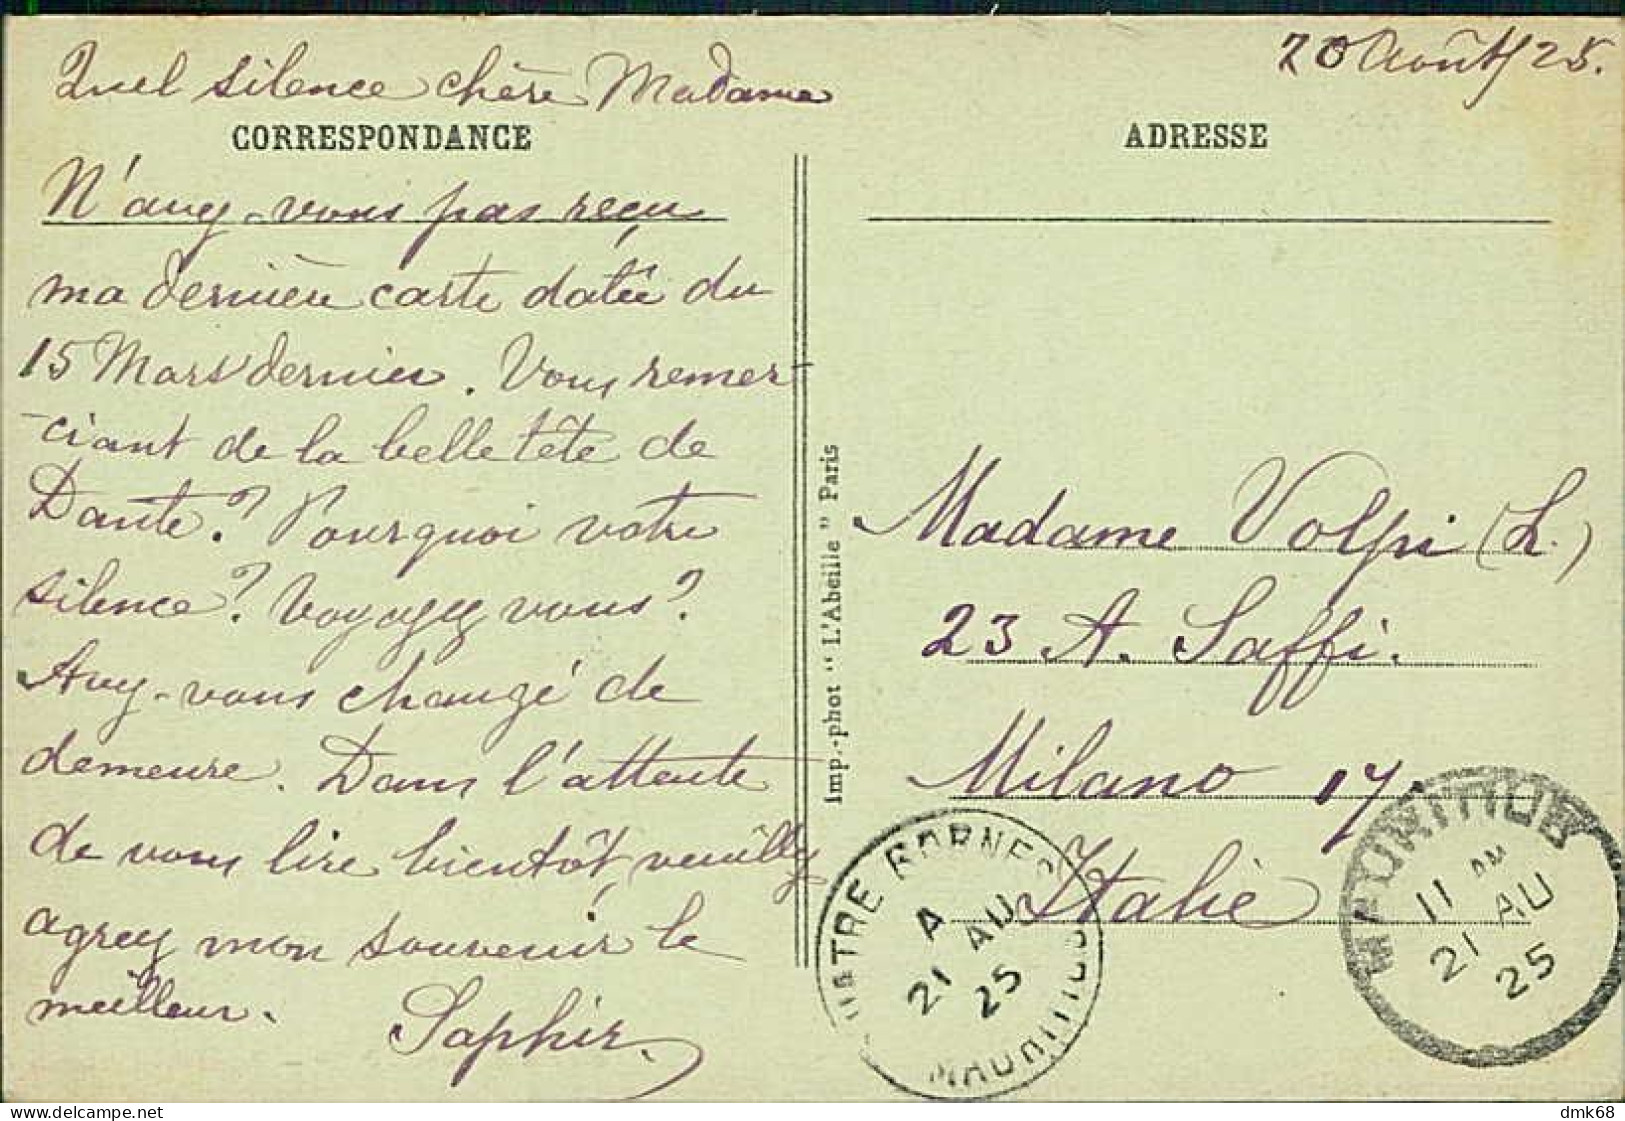 AFRICA - MAURITIUS / ILE MAURICE - CUREPIPE - HOTEL DE VILLE PHO. L'ABEILLE - MAILED 1925 / STAMP (12573) - Maurice